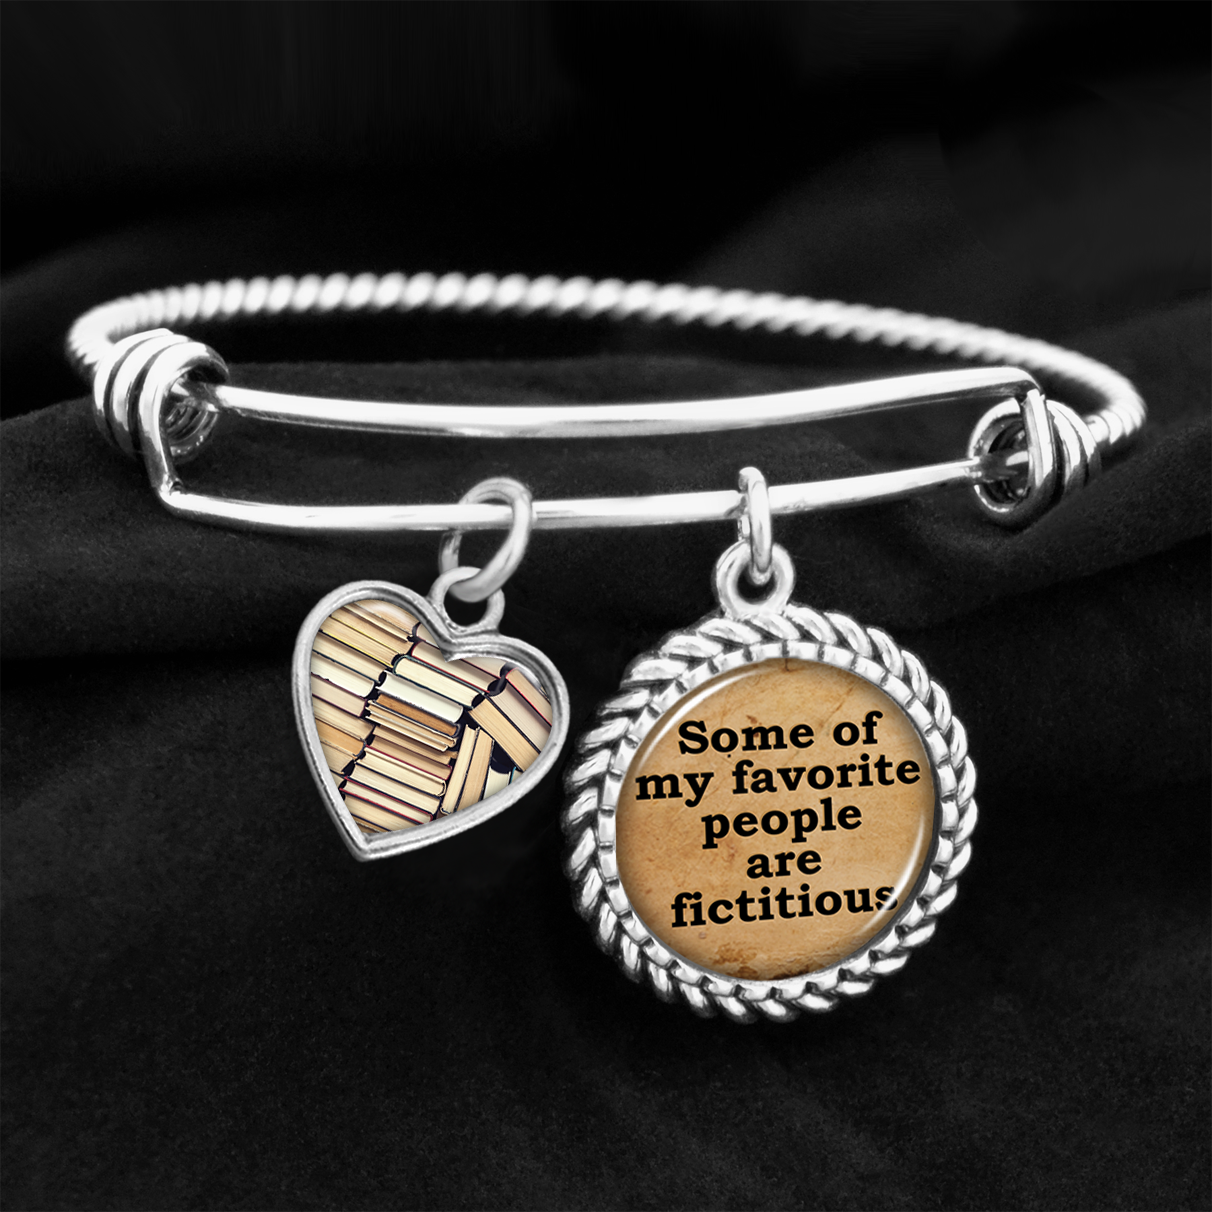 Some Of My Favorite People Are Fictitious Charm Bracelet